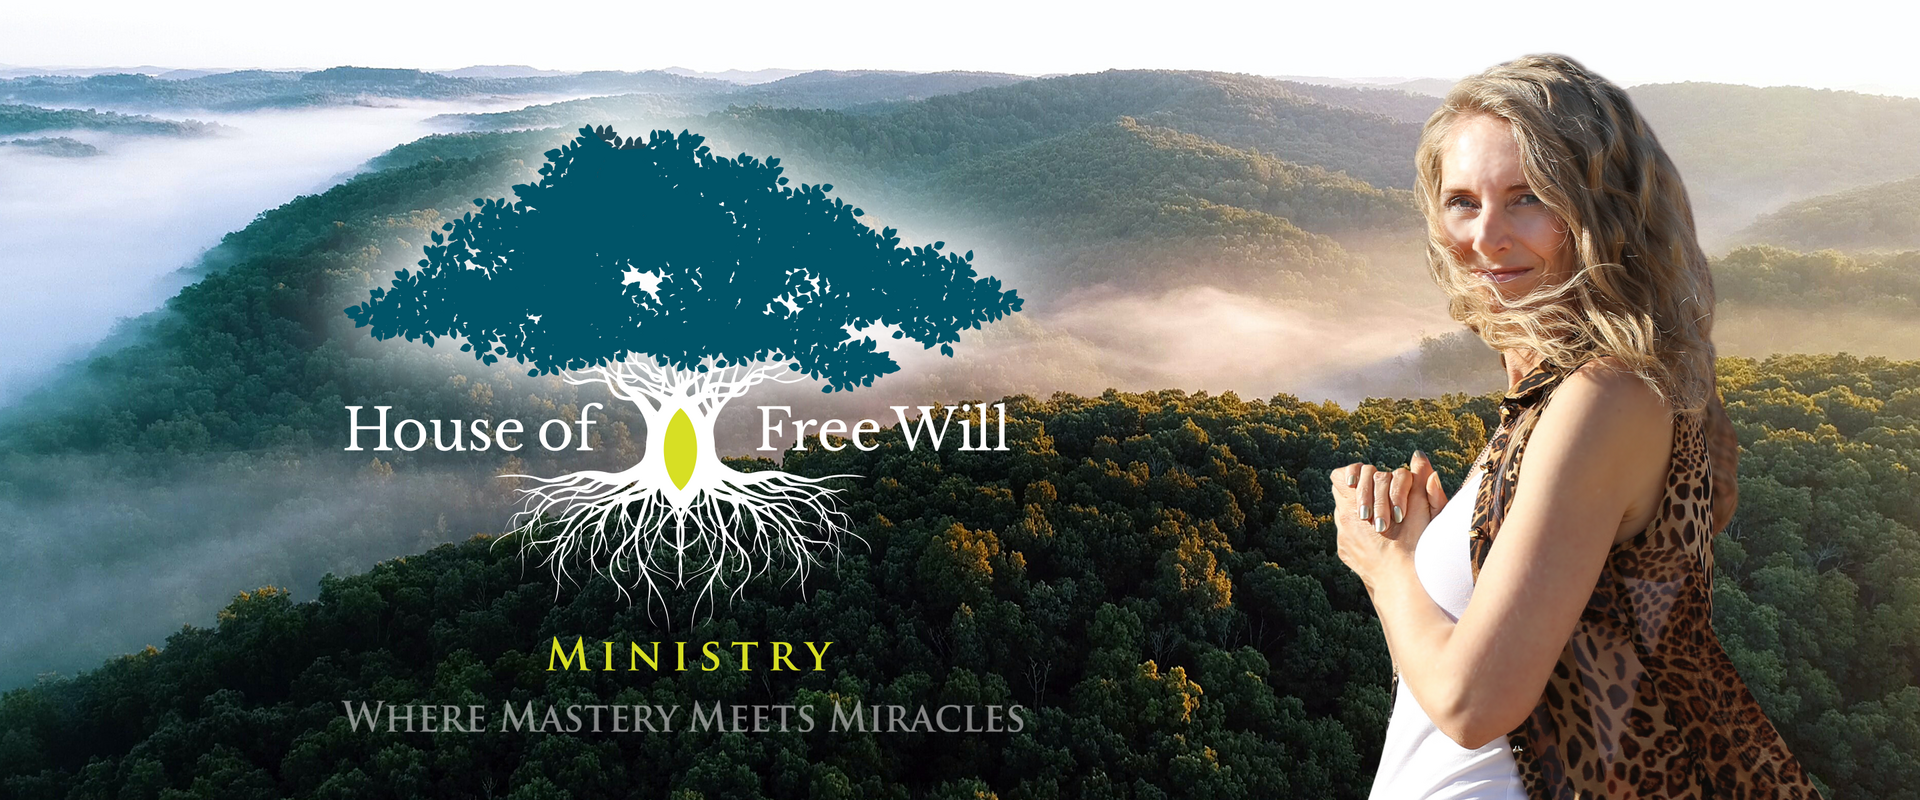 BM House of Free Will Ministry Banner 2880x1200